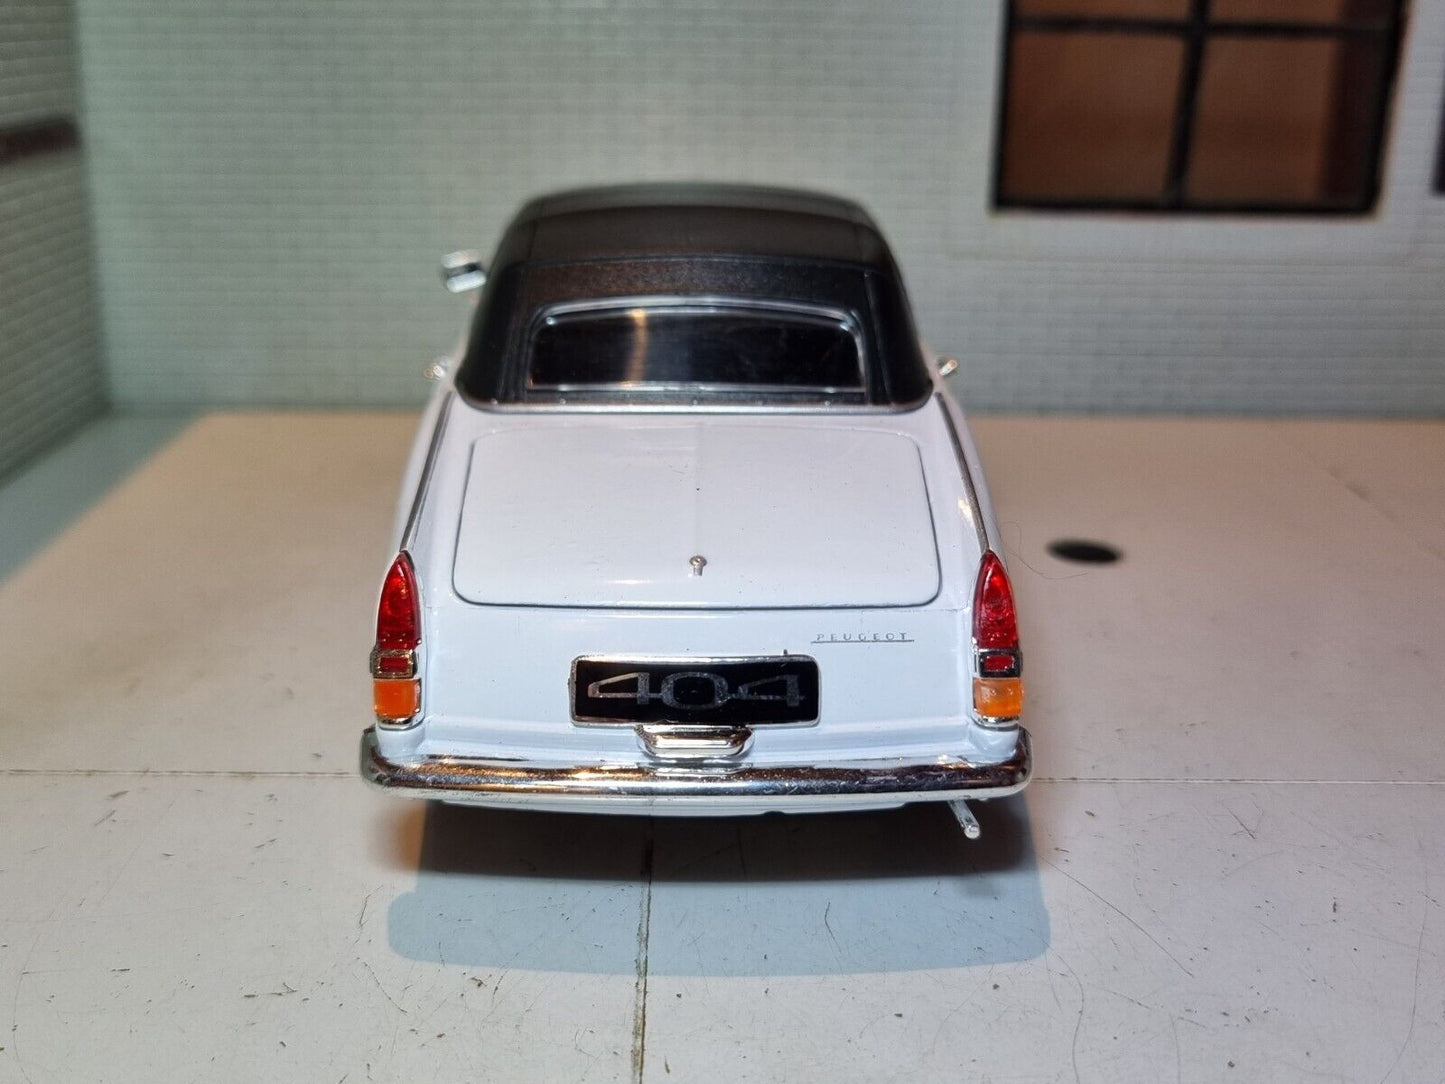 Peugeot 404 Cabriolet 22494 Welly 1:24